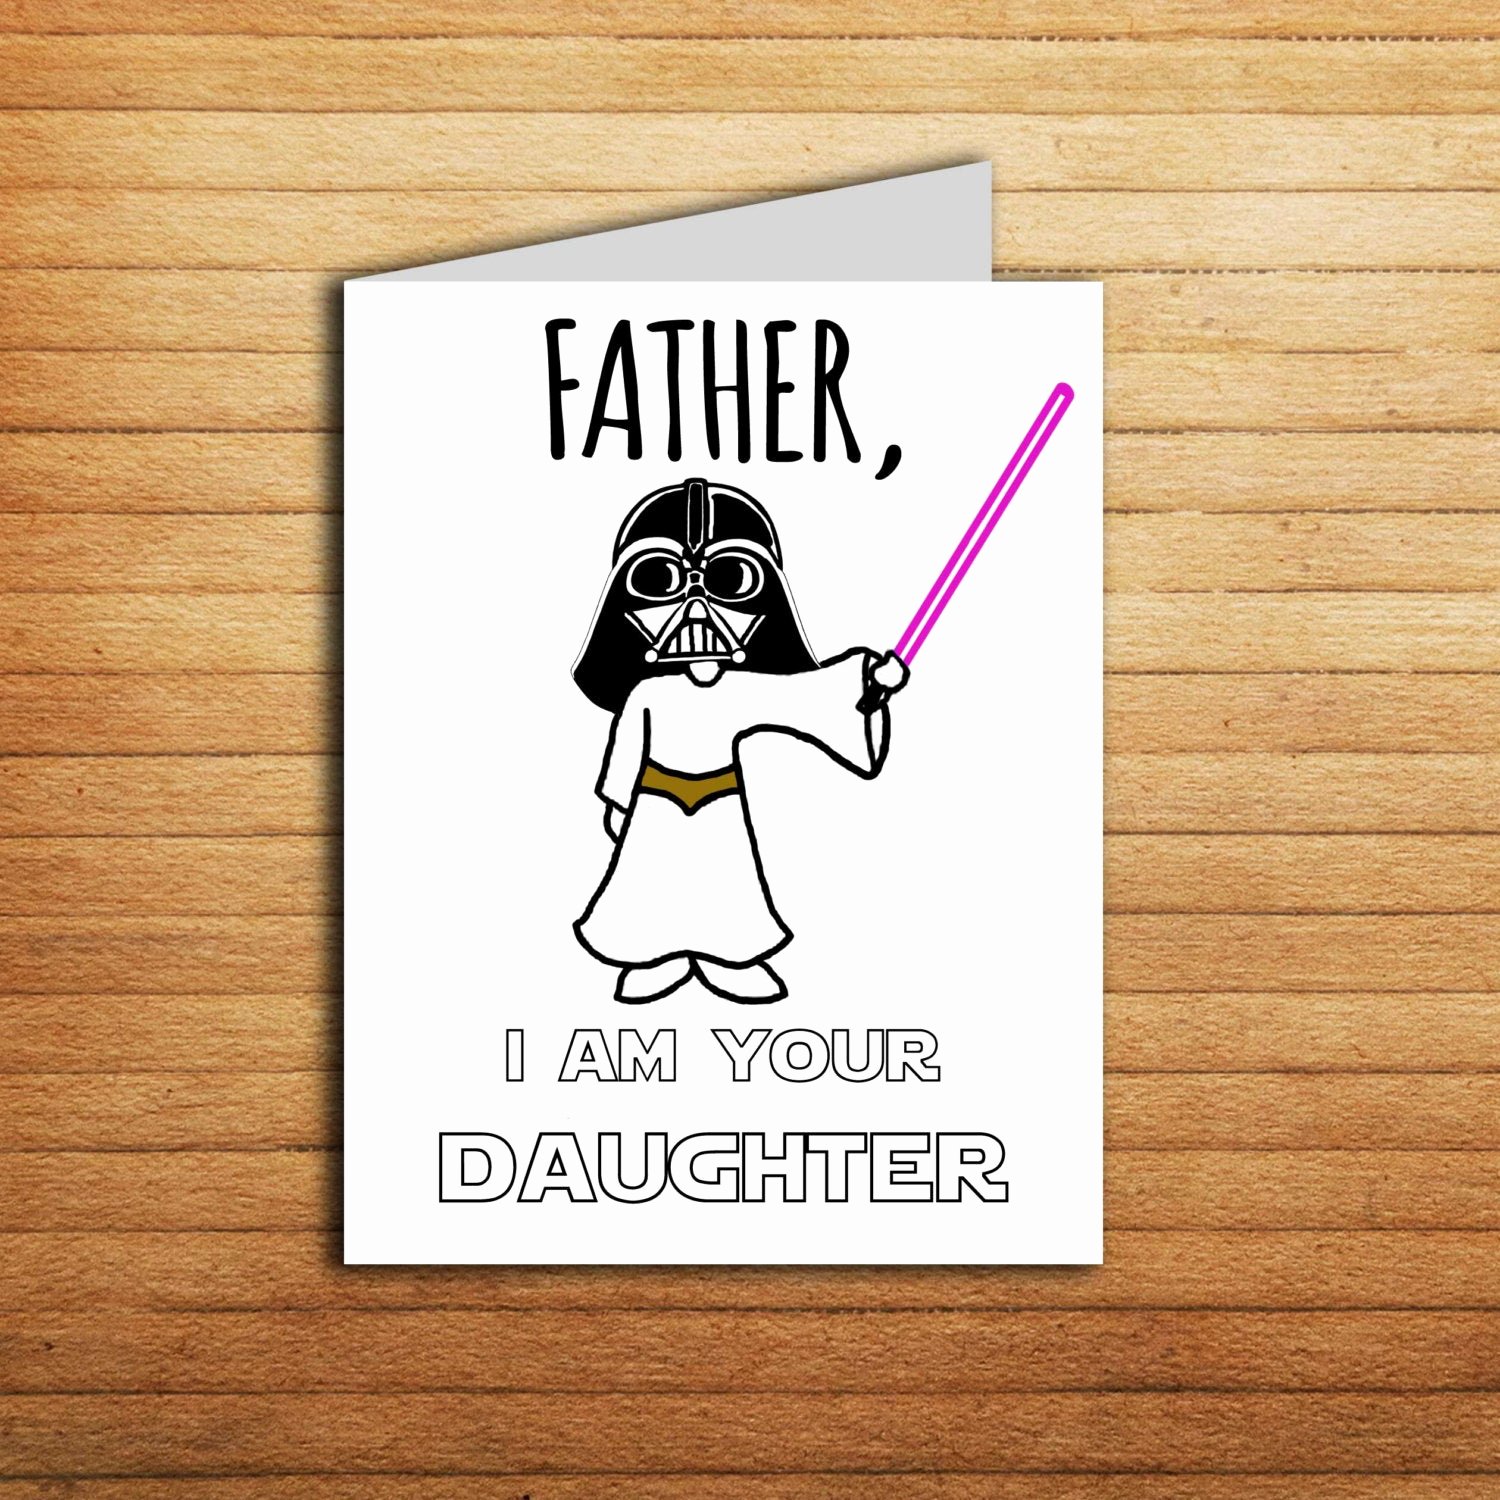 Star Wars Birthday Card Printable Lovely Star Wars Christmas Card Birthday Card for Dad T From